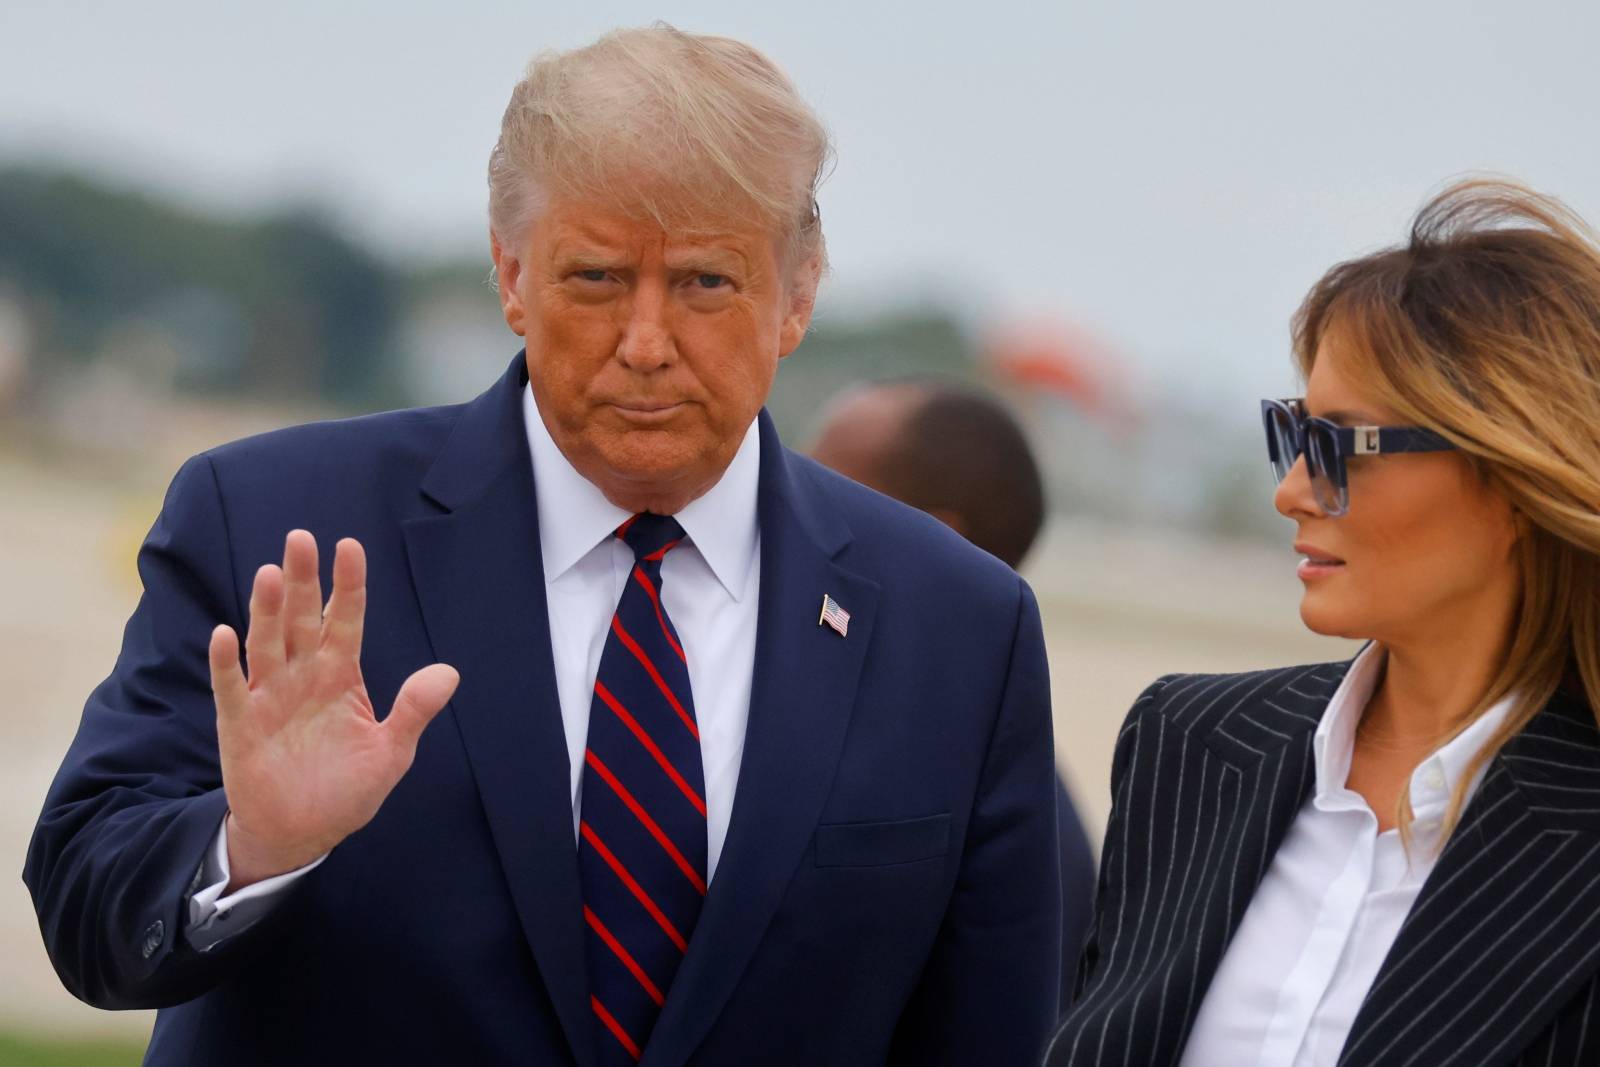 U.S. President Donald Trump walks with first lady Melania Trump at Cleveland Hopkins International Airport in Cleveland, Ohio